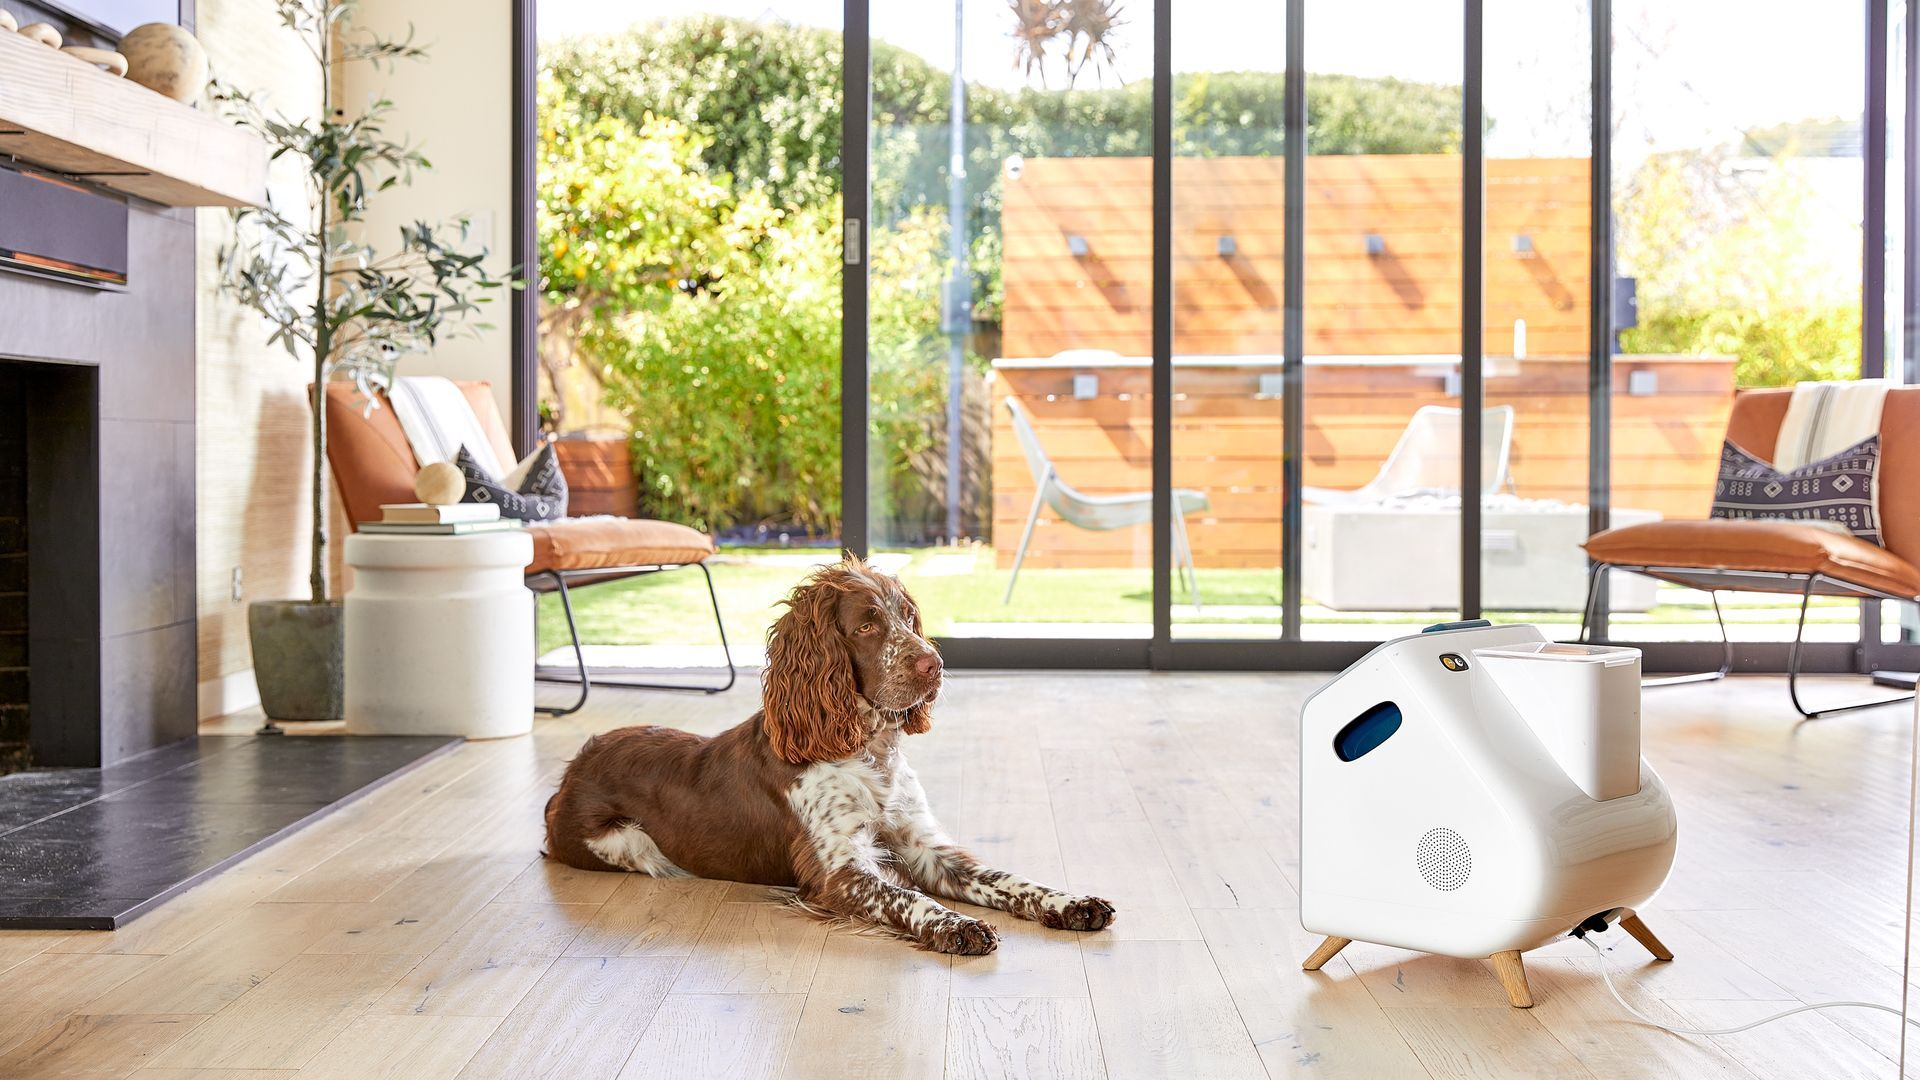 The Companion smart device is meant to entertain dogs while monitoring their health.